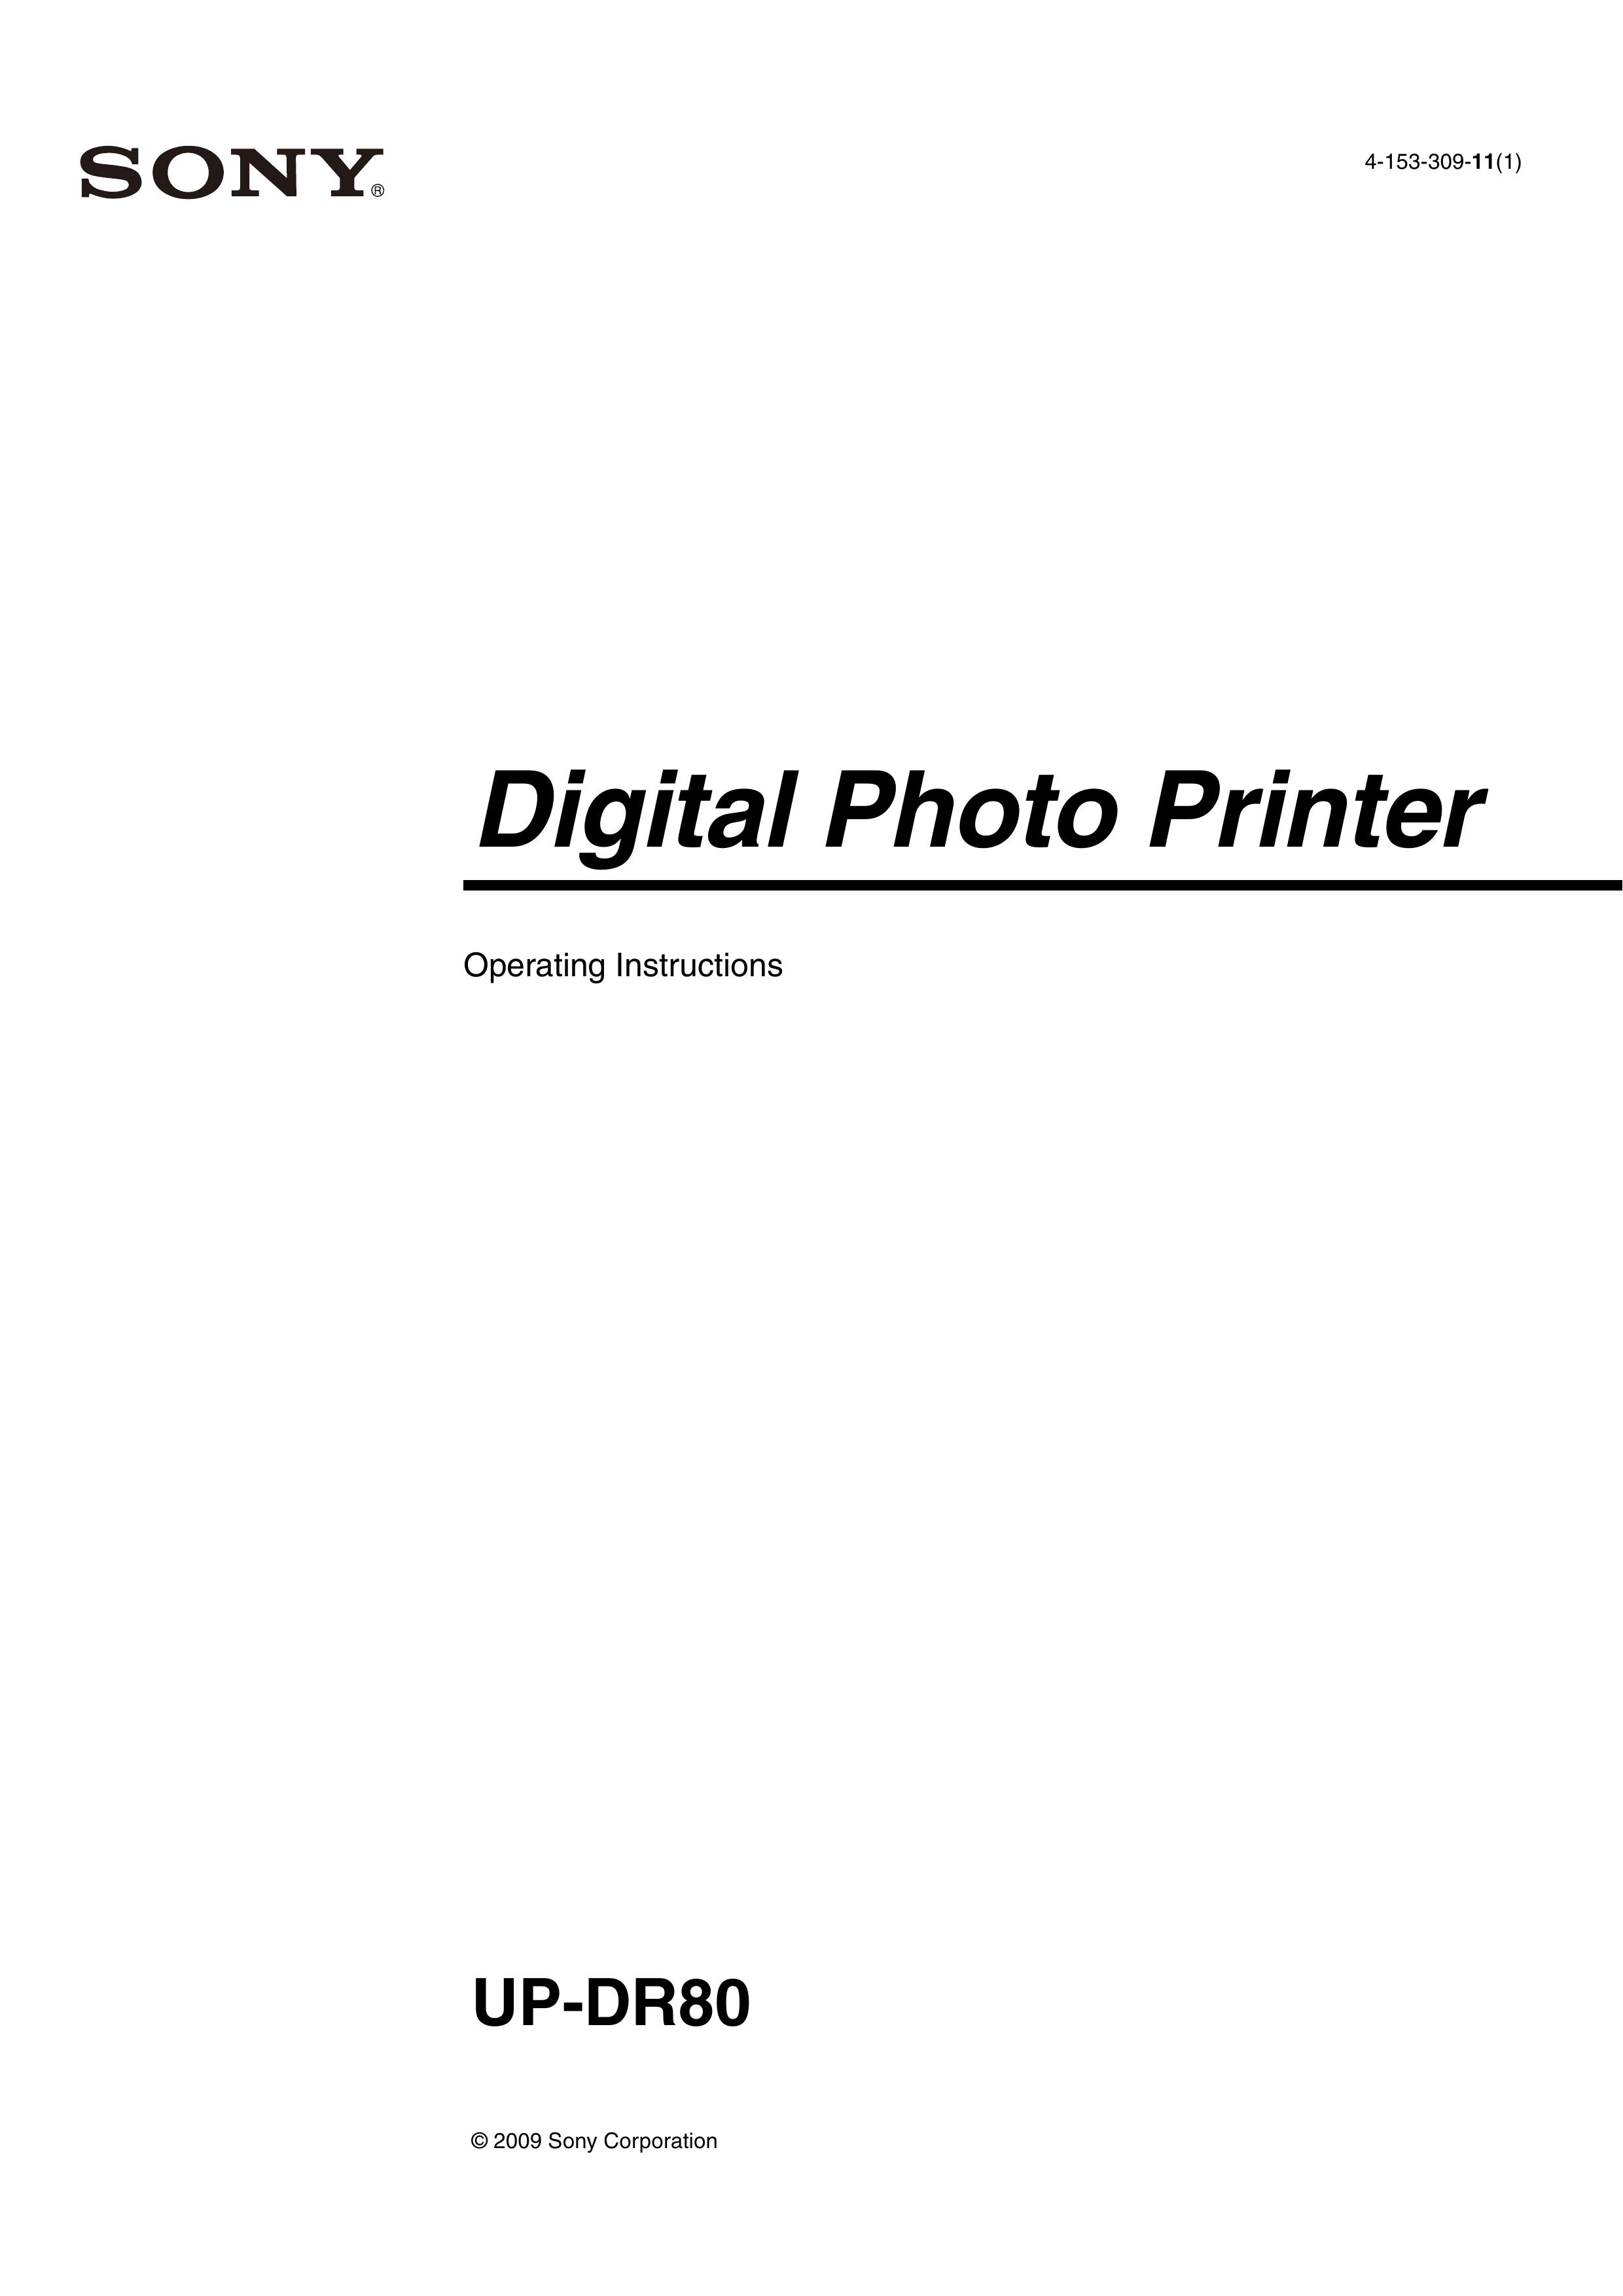 Sony UP-DR80 Photo Printer User Manual